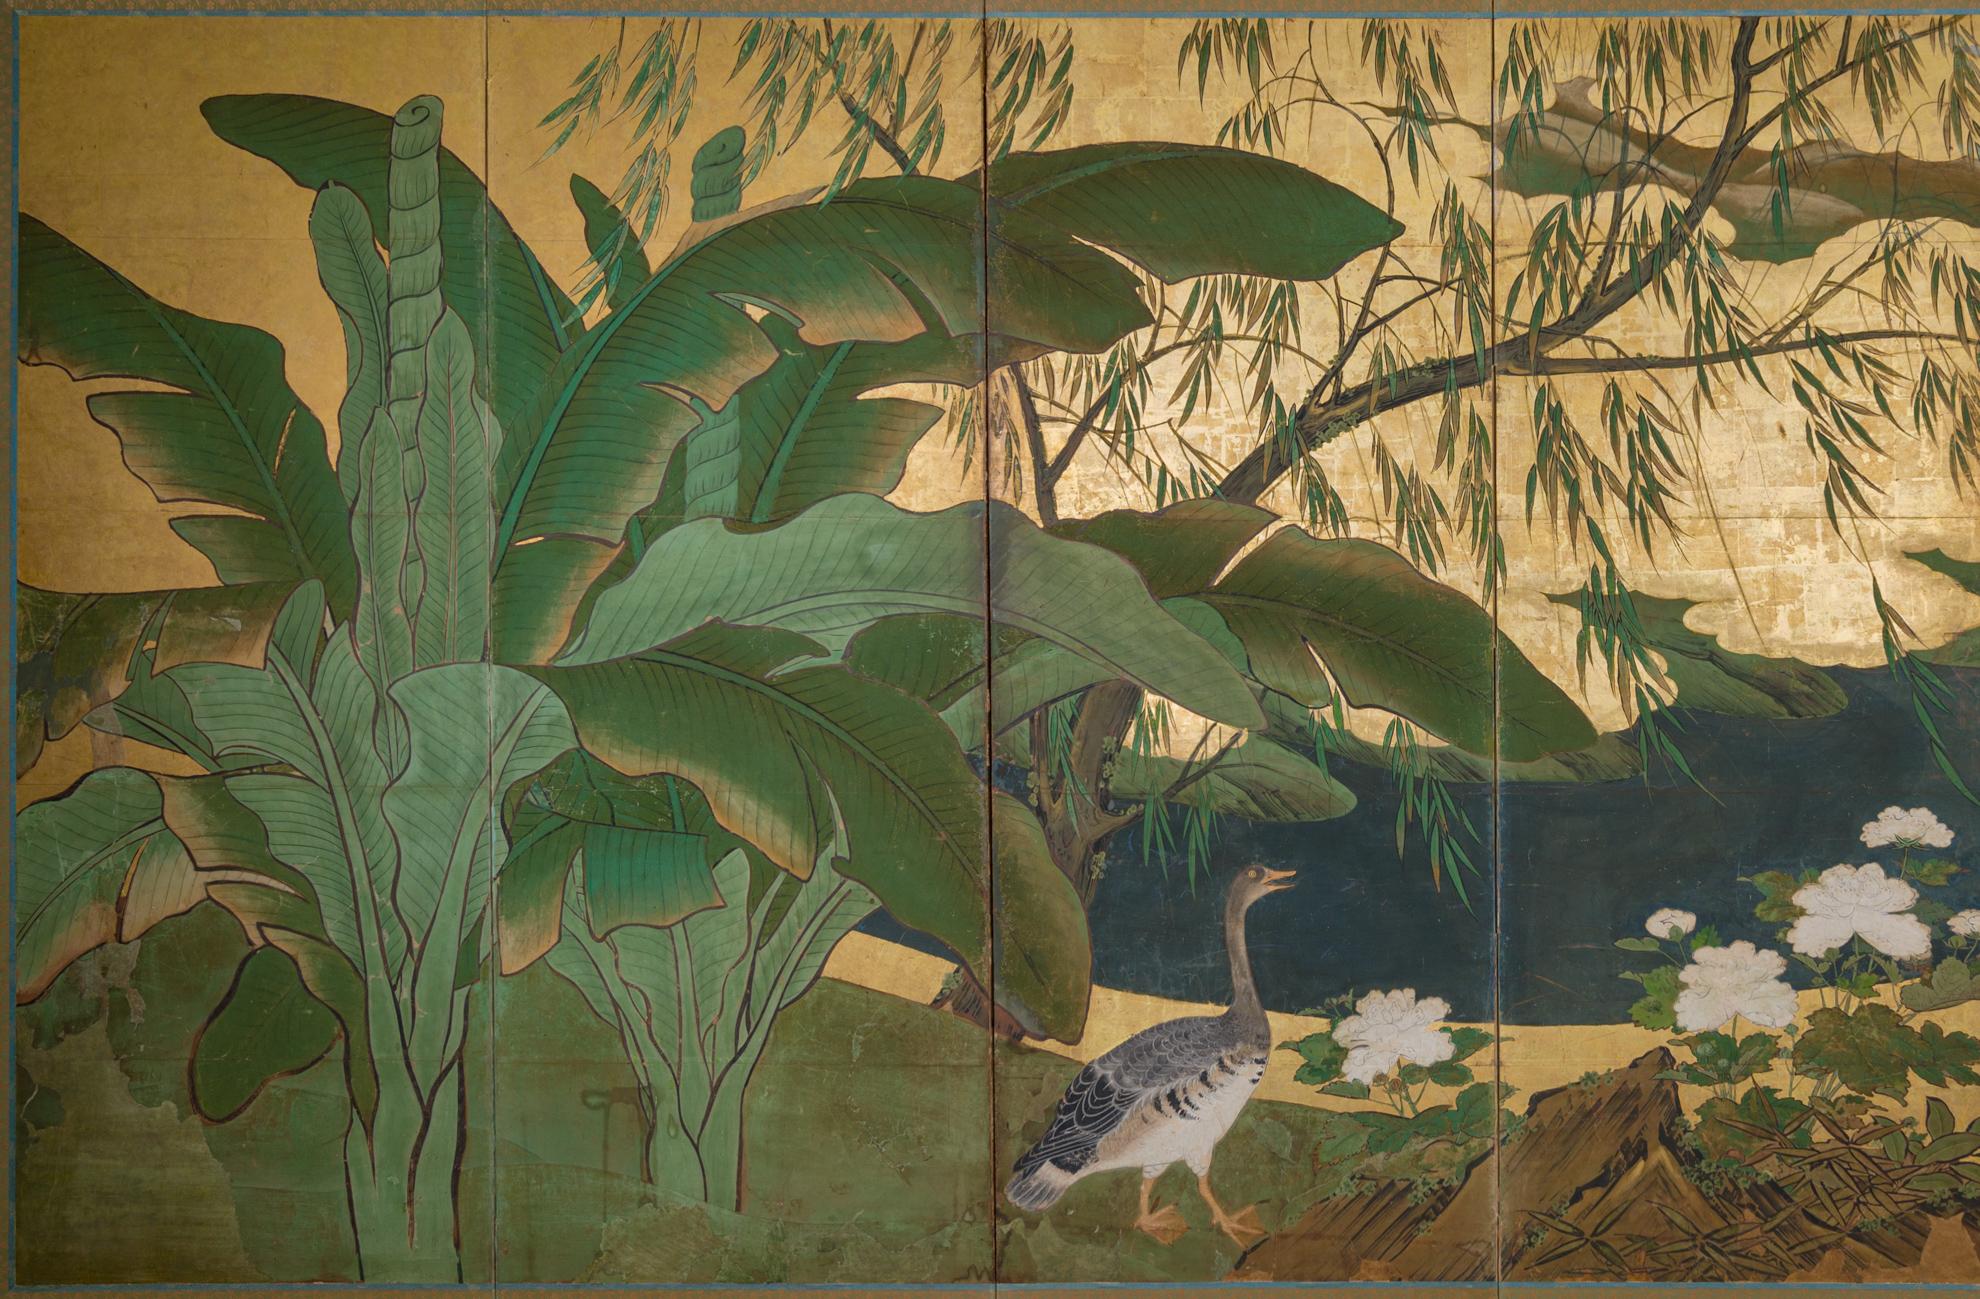 With a banana leaf palm on the left, at water's edge with geese. Perhaps a scene from the southern islands. Mineral pigments on mulberry paper with gold leaf and a silk brocade border.